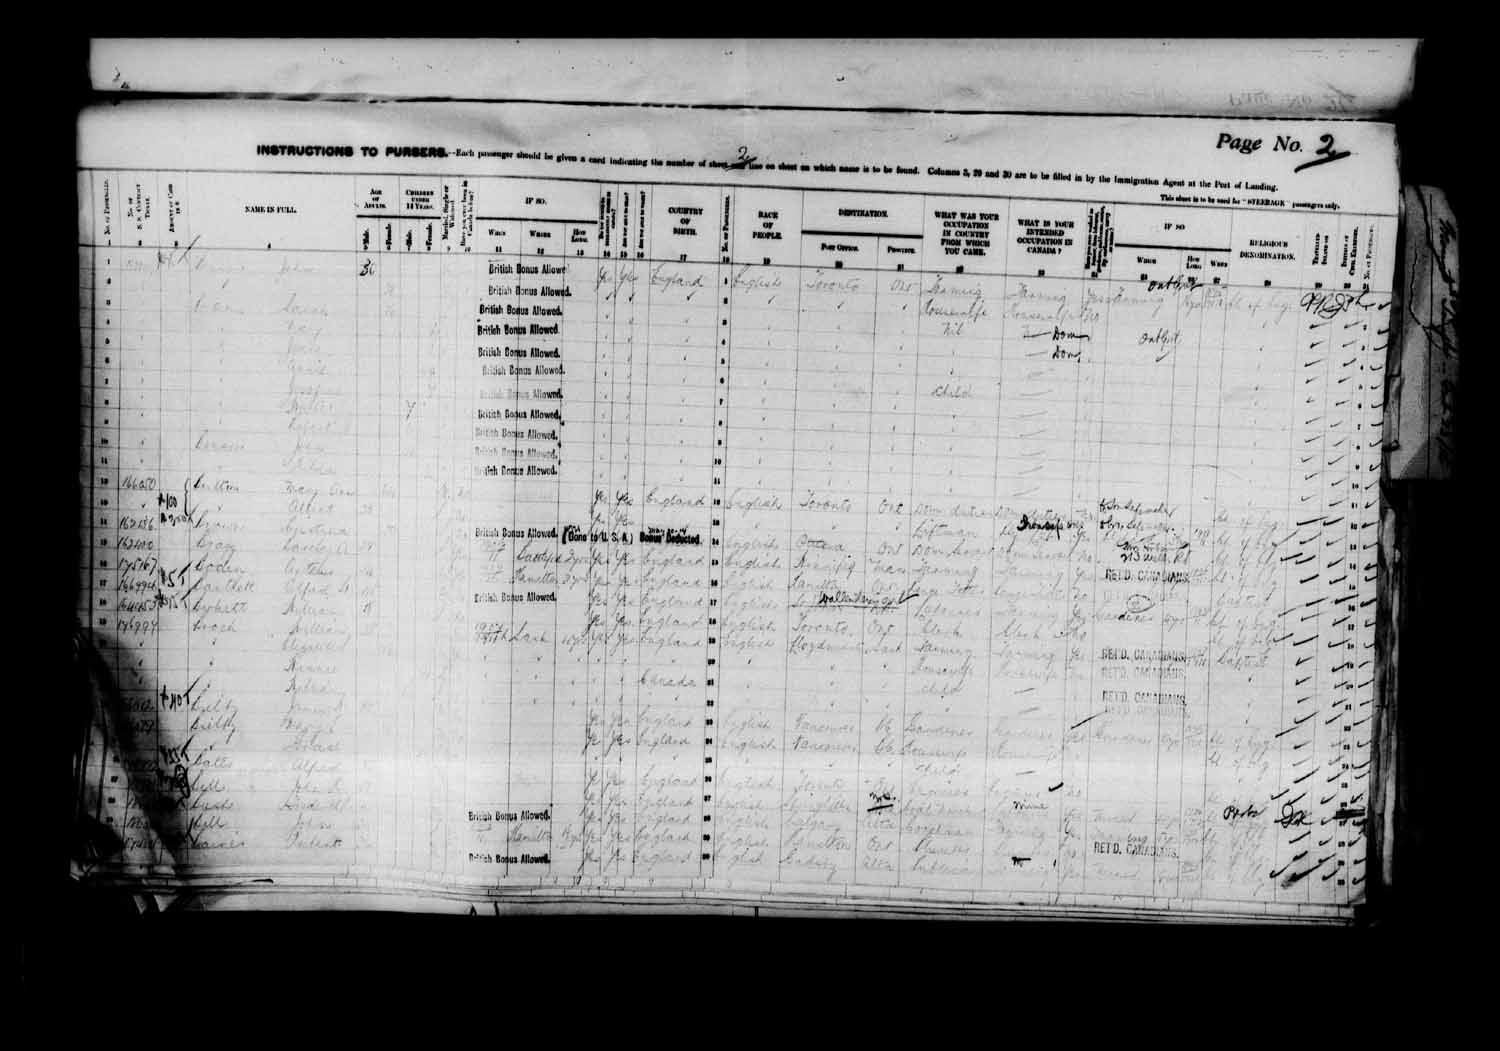 Digitized page of Passenger Lists for Image No.: e003627190